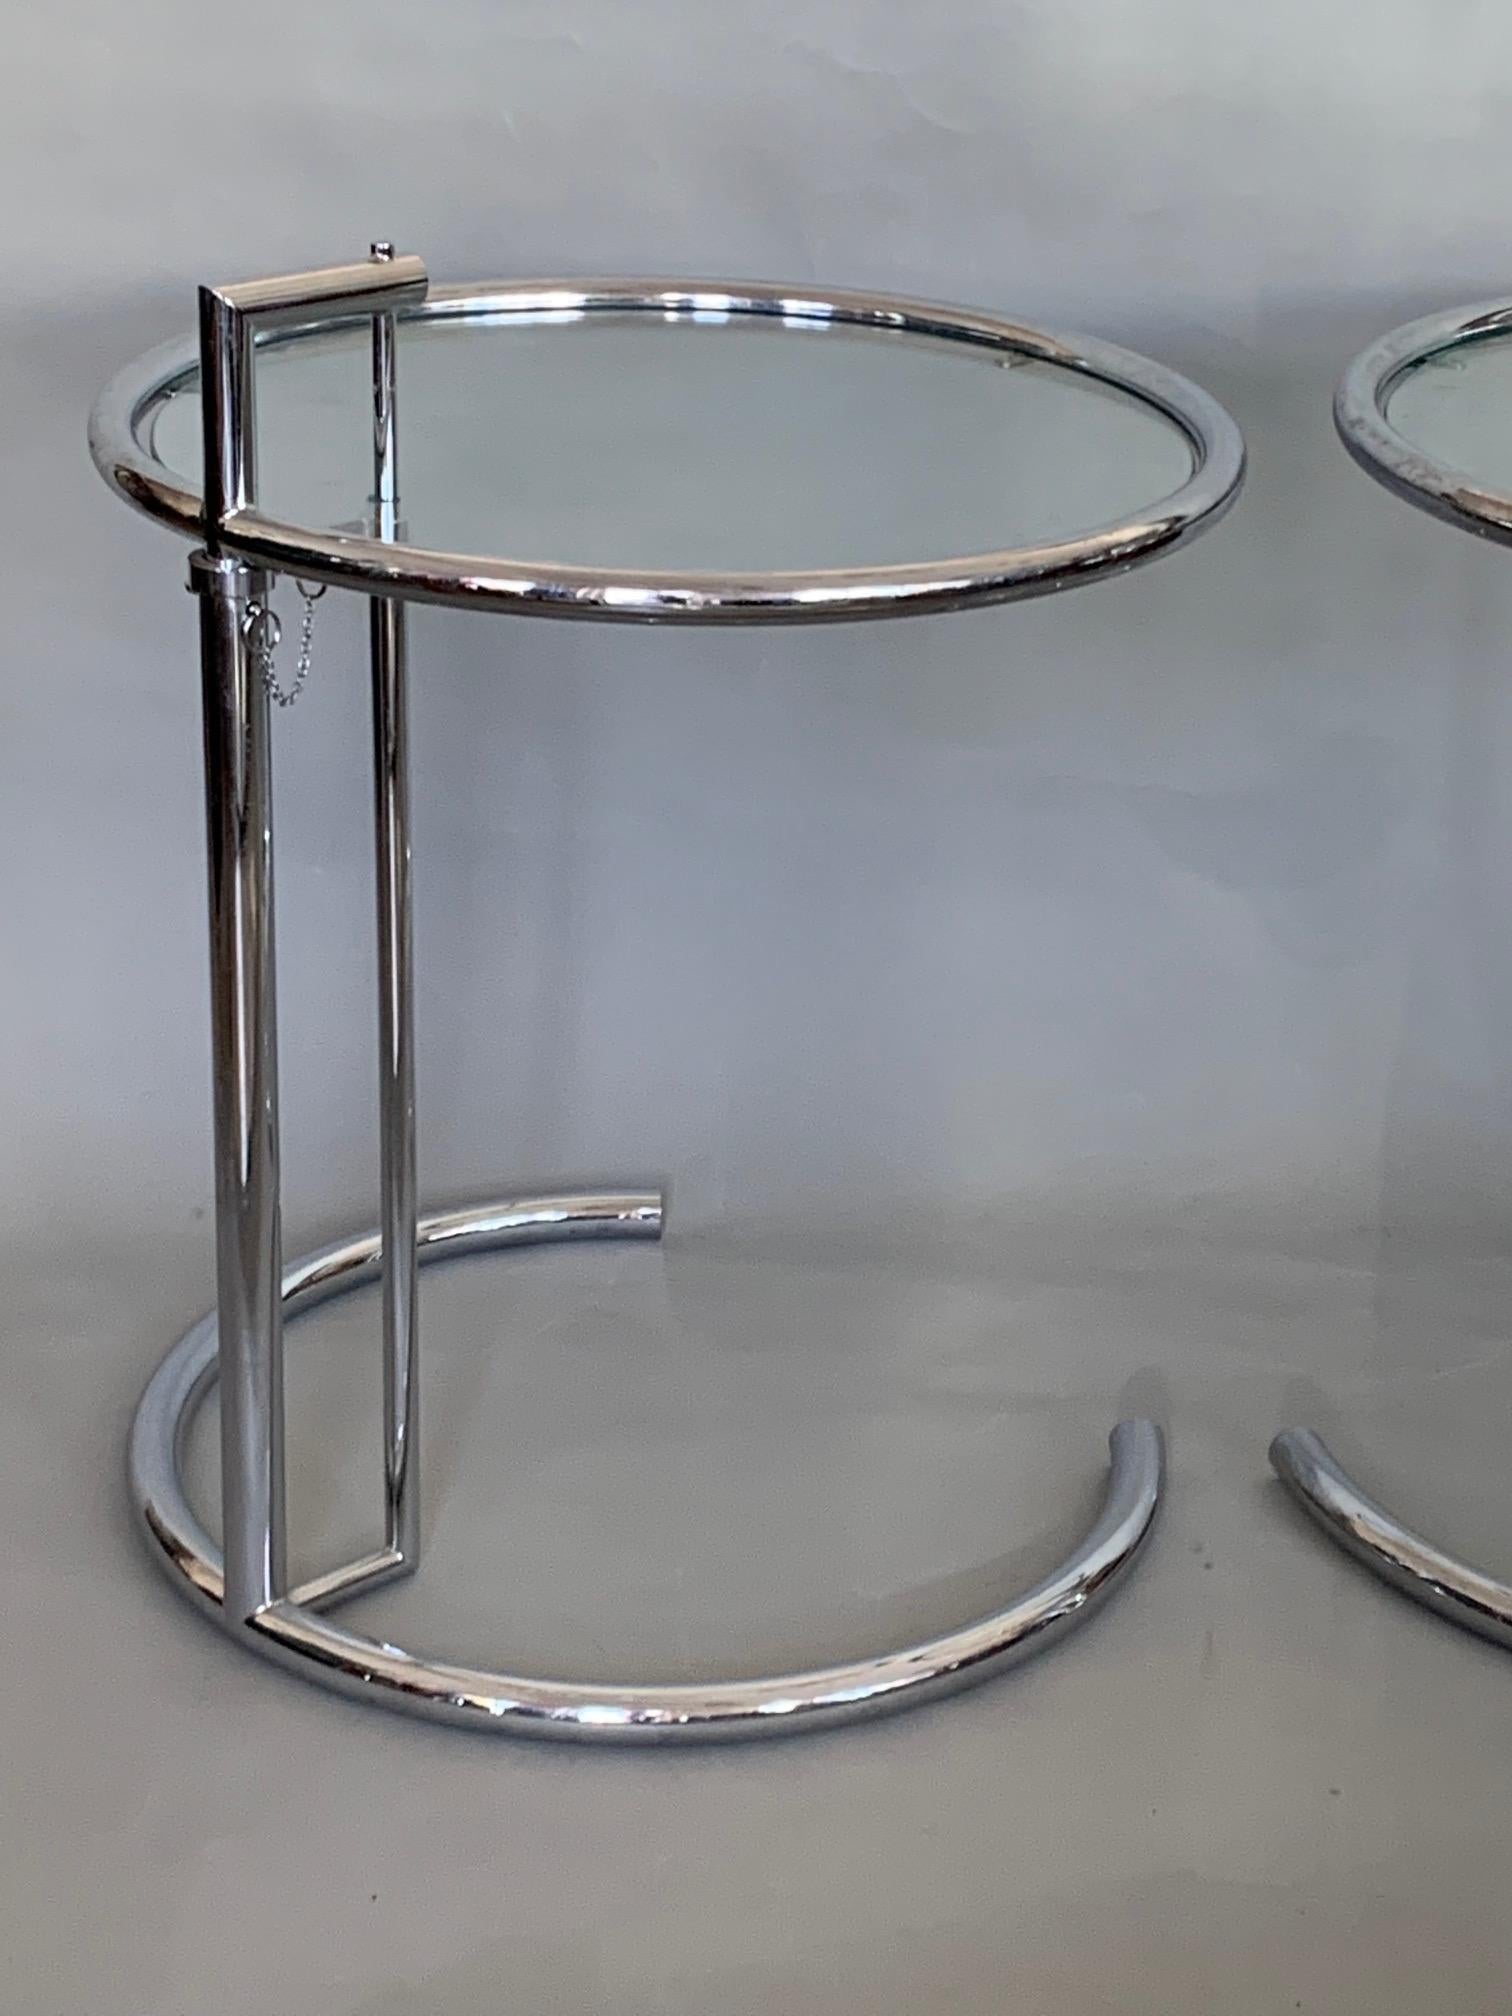 A pair of iconic tables designed by Eileen Gray, circa 1920s. The tops adjust from approximate 22